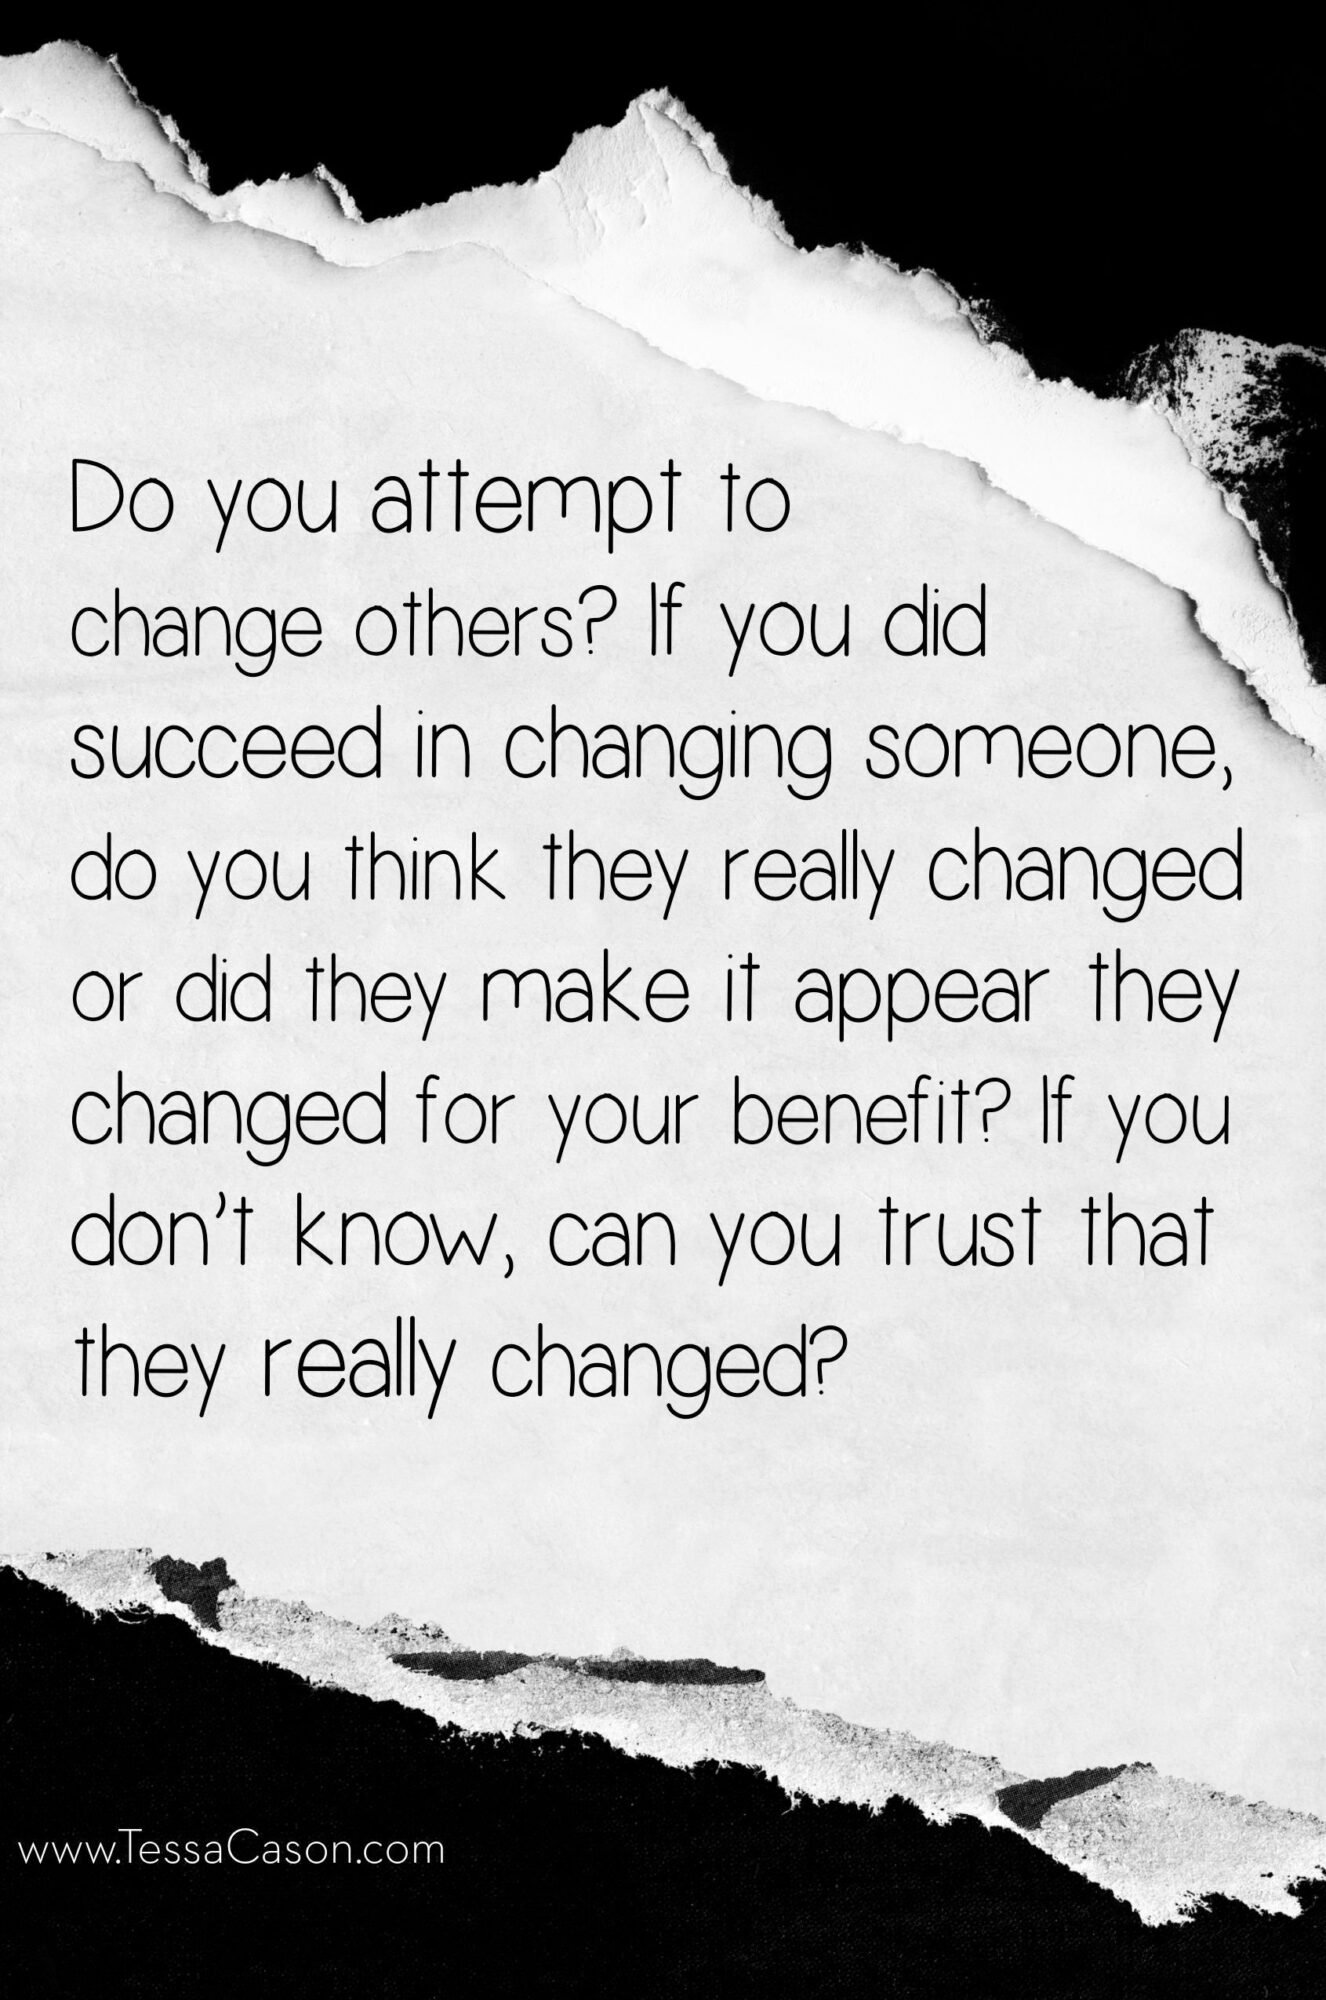 Do you attempt to change others